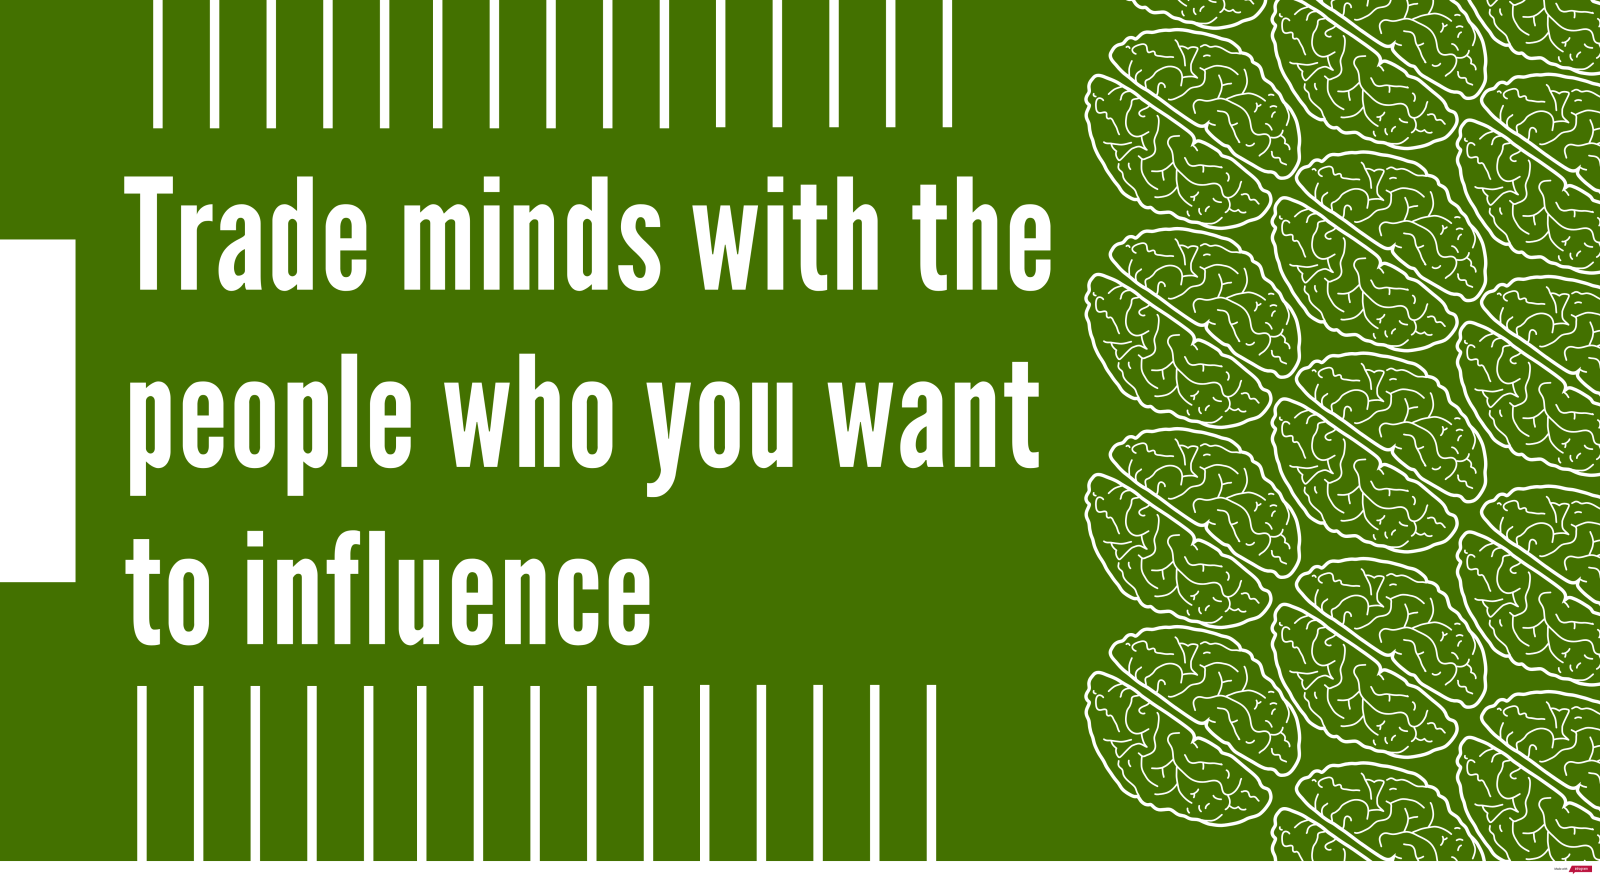 Trade minds with the people who you want to influence